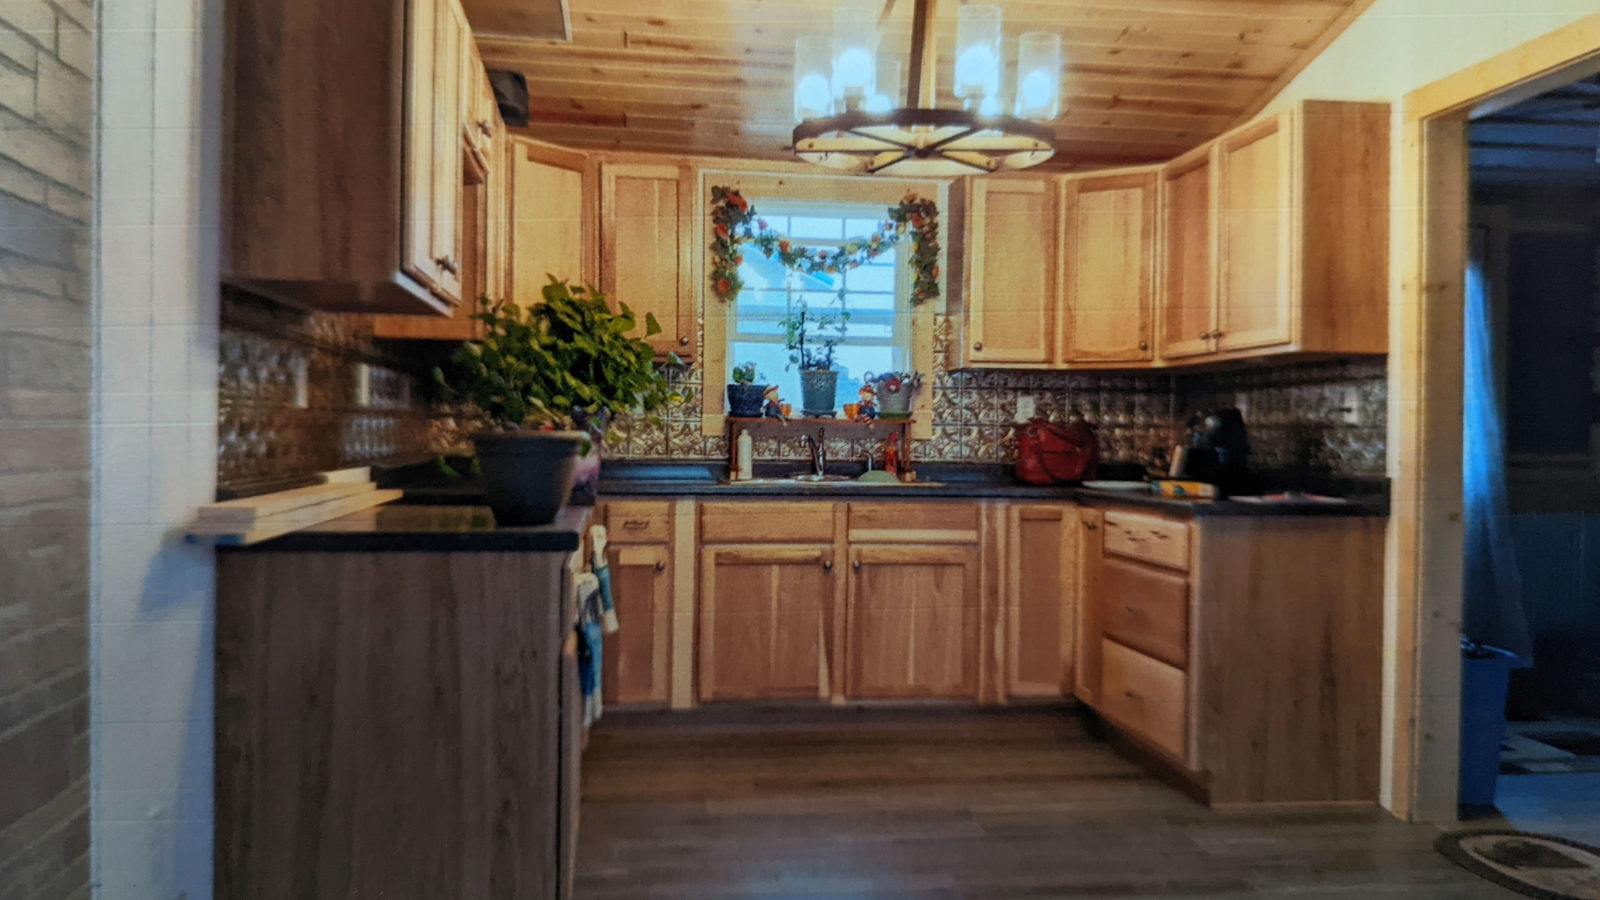 interior of kitchen of cabin home for sale